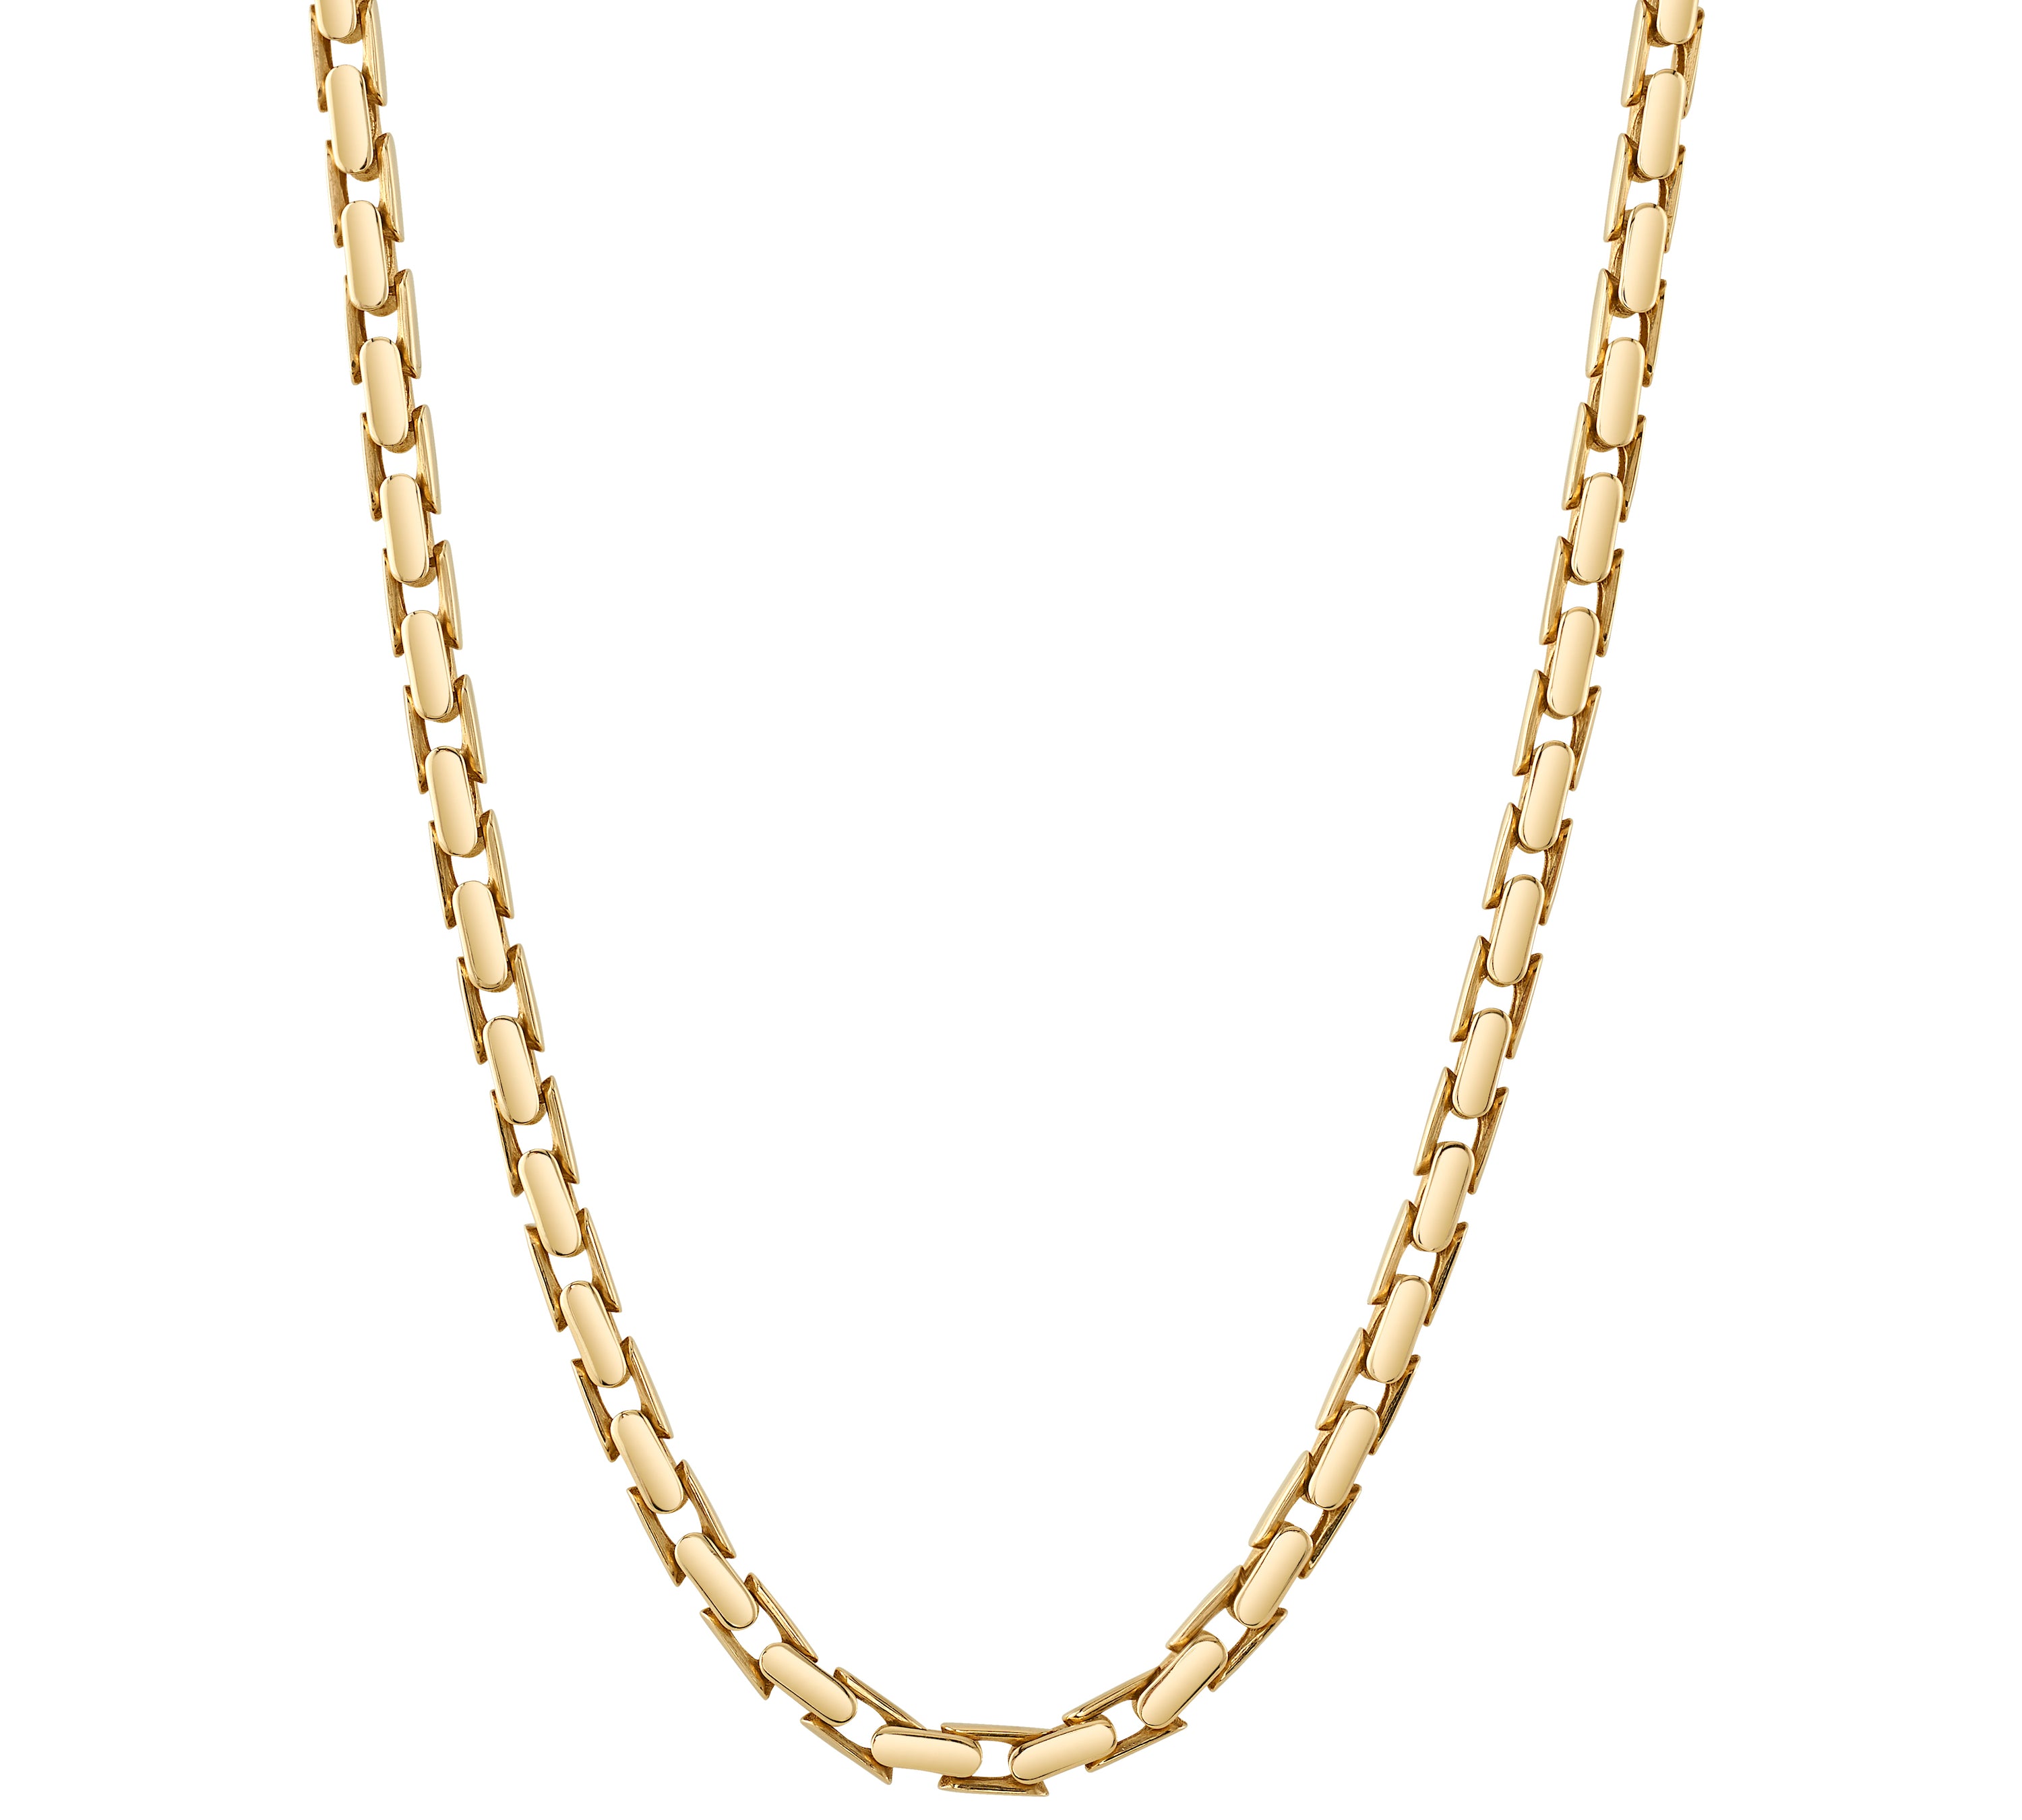 Chunky Gold Chain Chain Necklace Roseark Deux   